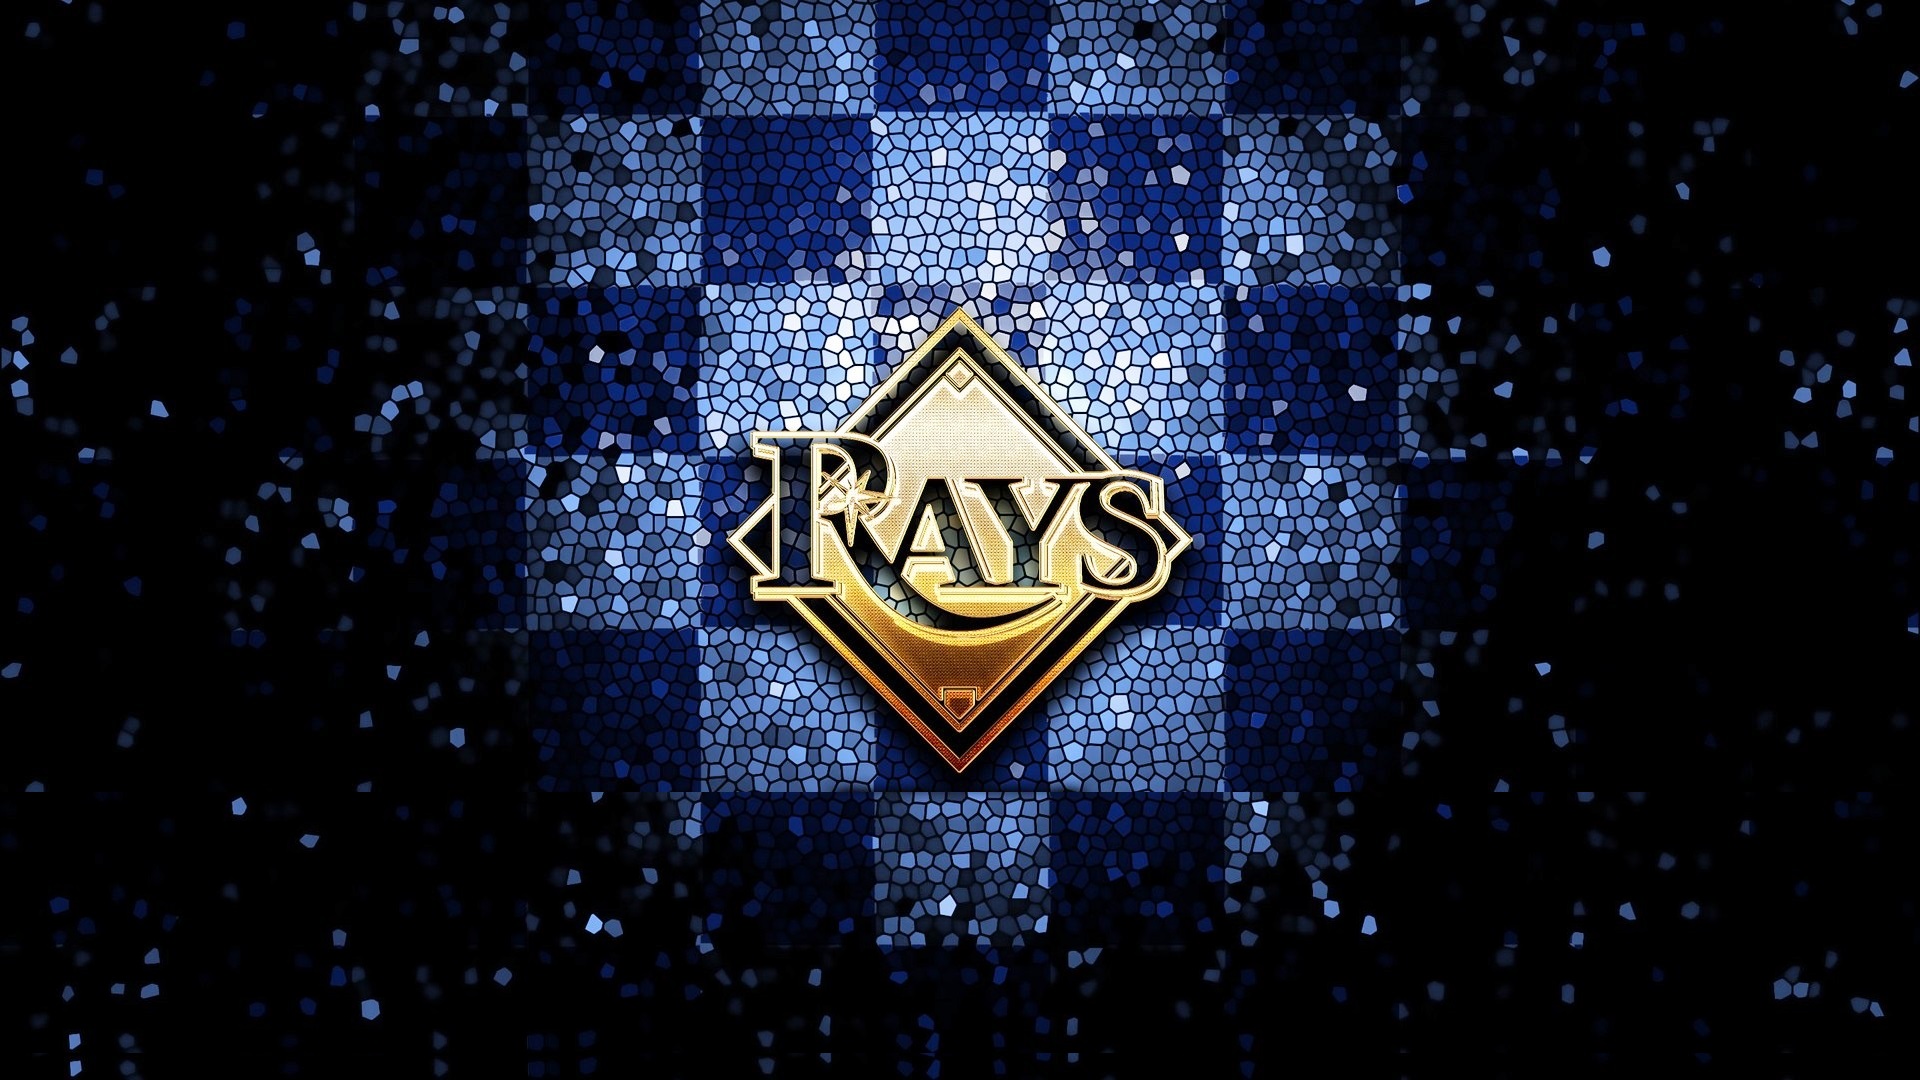 Tampa Bay Rays Mac Backgrounds with high-resolution 1920x1080 pixel. You can use this wallpaper for Mac Desktop Wallpaper, Laptop Screensavers, Android Wallpapers, Tablet or iPhone Home Screen and another mobile phone device